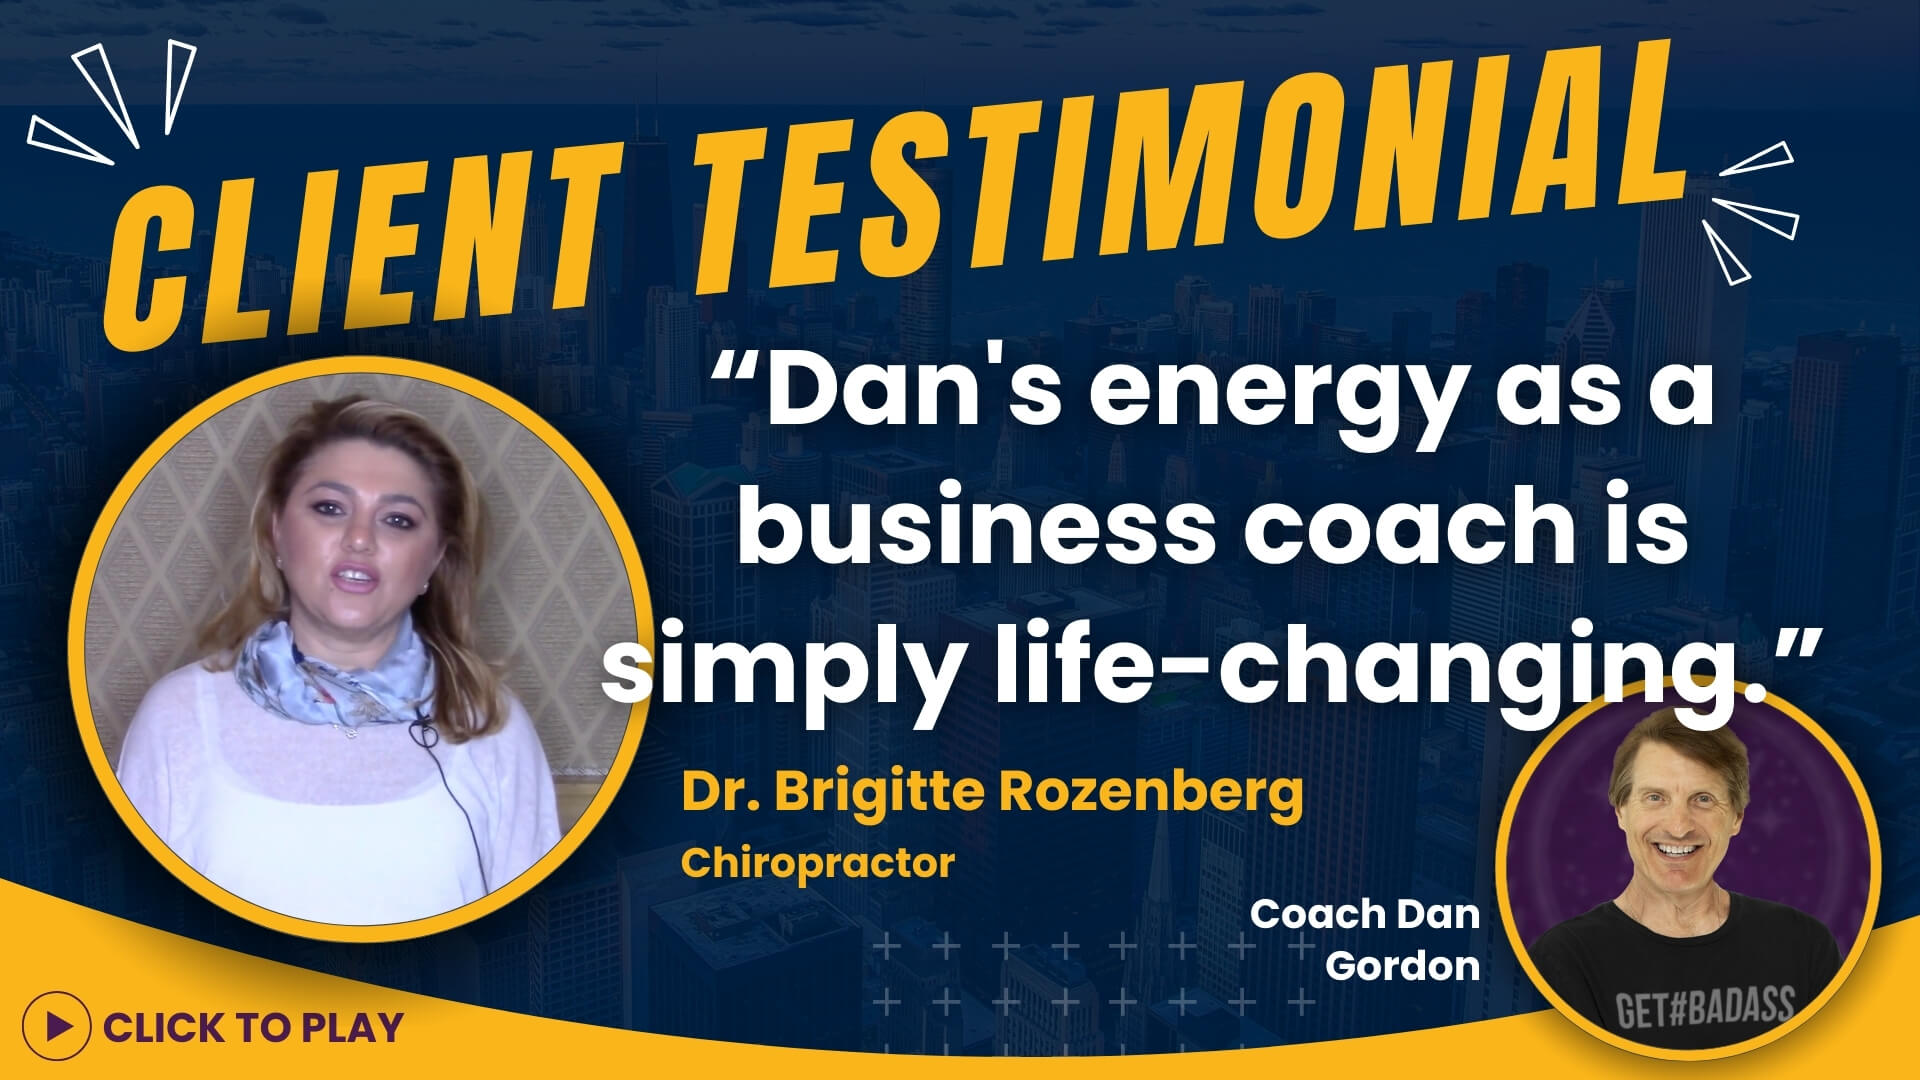 Dr. Brigitte Rozenberg describes Coach Dan Gordon's energizing influence as a business coach in her video testimonial, accompanied by a 'Click to Play' button.